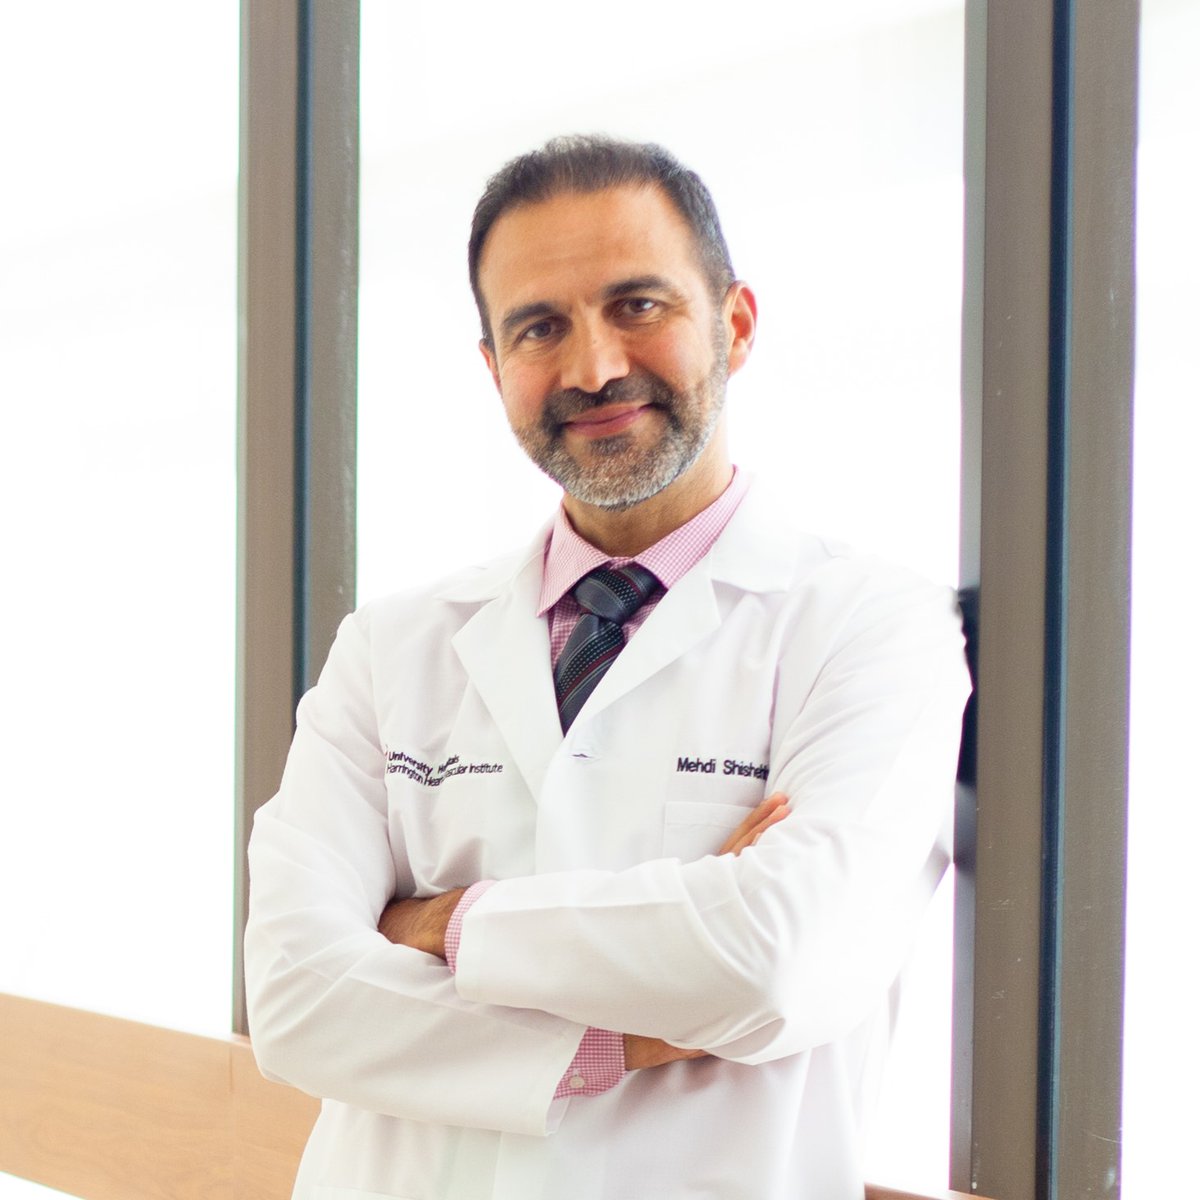 As a result of Dr. Mehdi Shishehbor's transformative research, @UHhospitals Harrington Heart & Vascular Institute is being included in this year's #STATMadness tournament! Learn more and vote here: statnews.com/feature/stat-m…